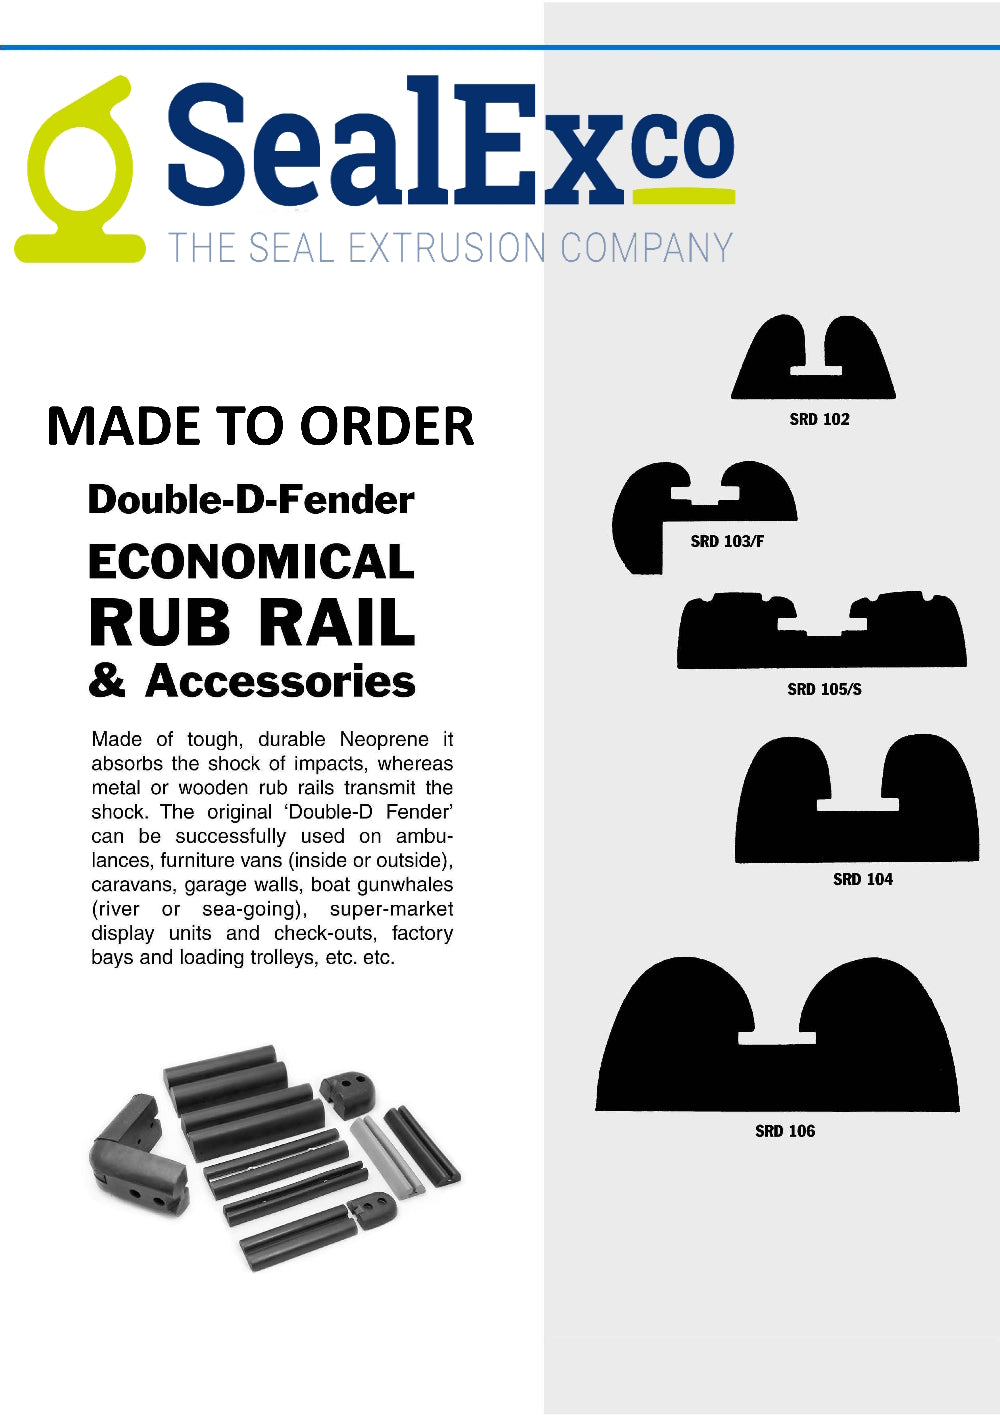 Double-D-Fender / Rub Rails - Made to Order - The Seal Extrusion Company LTD